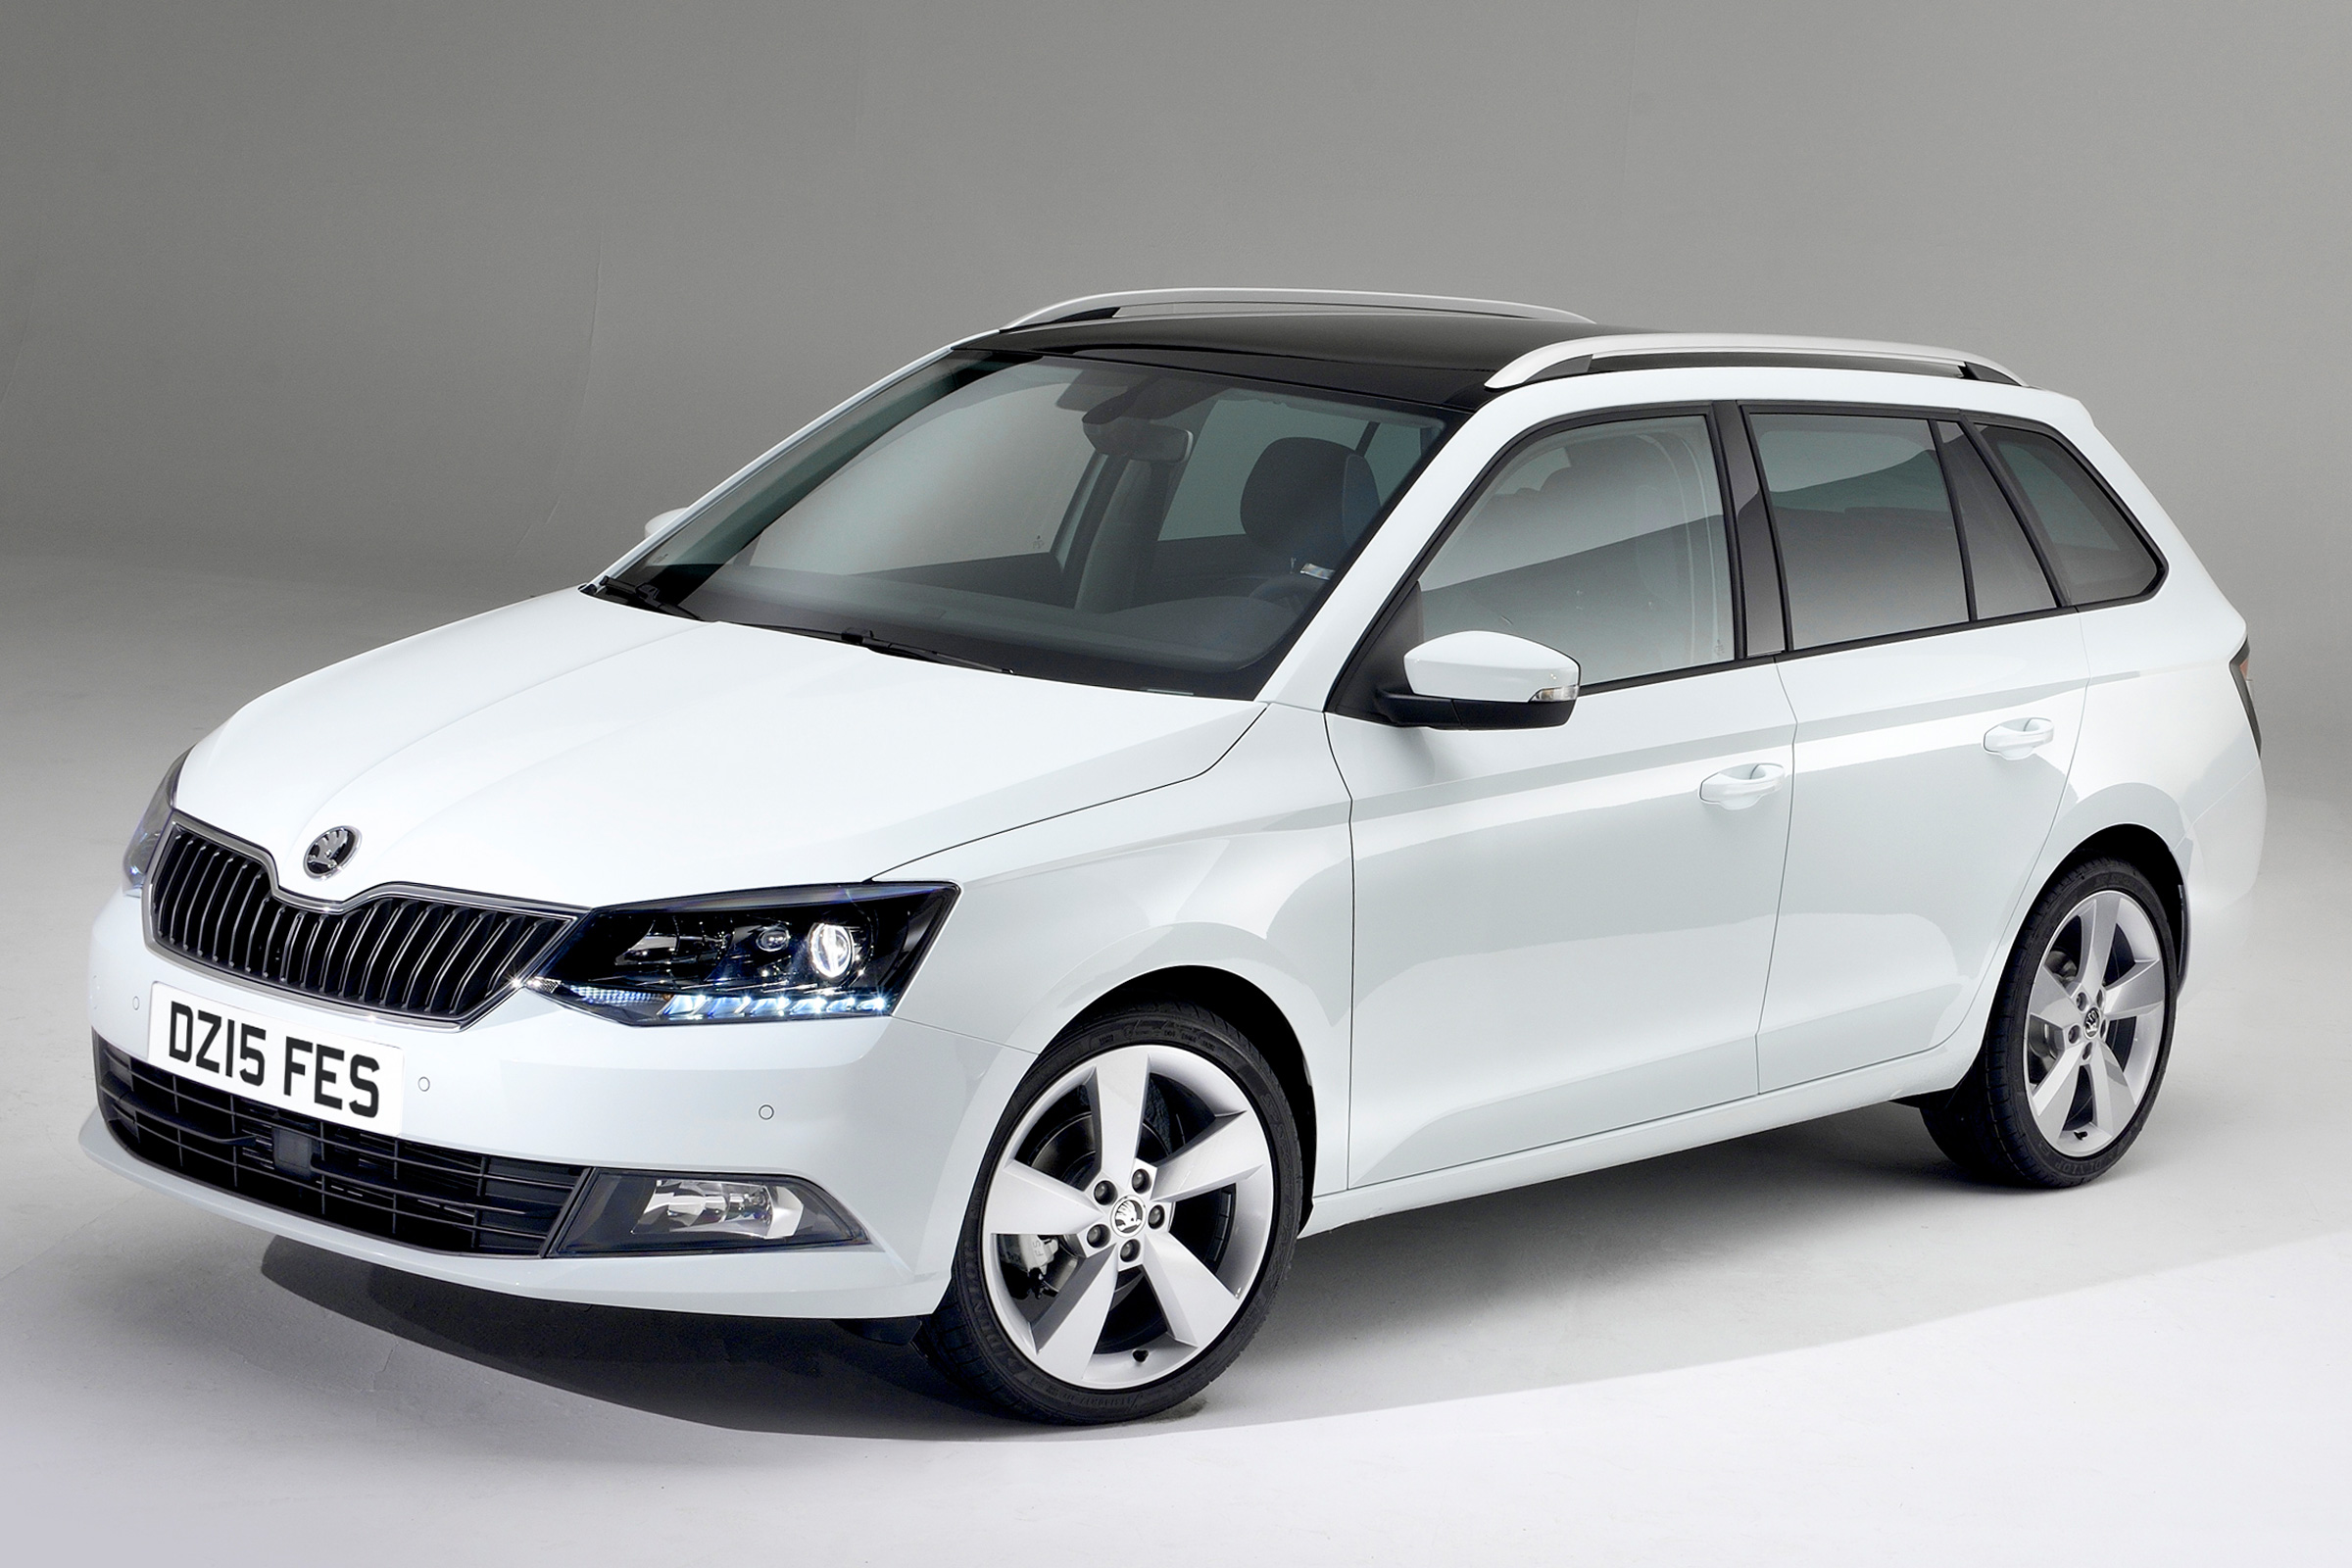 Skoda Fabia Estate priced from £12,400 Carbuyer